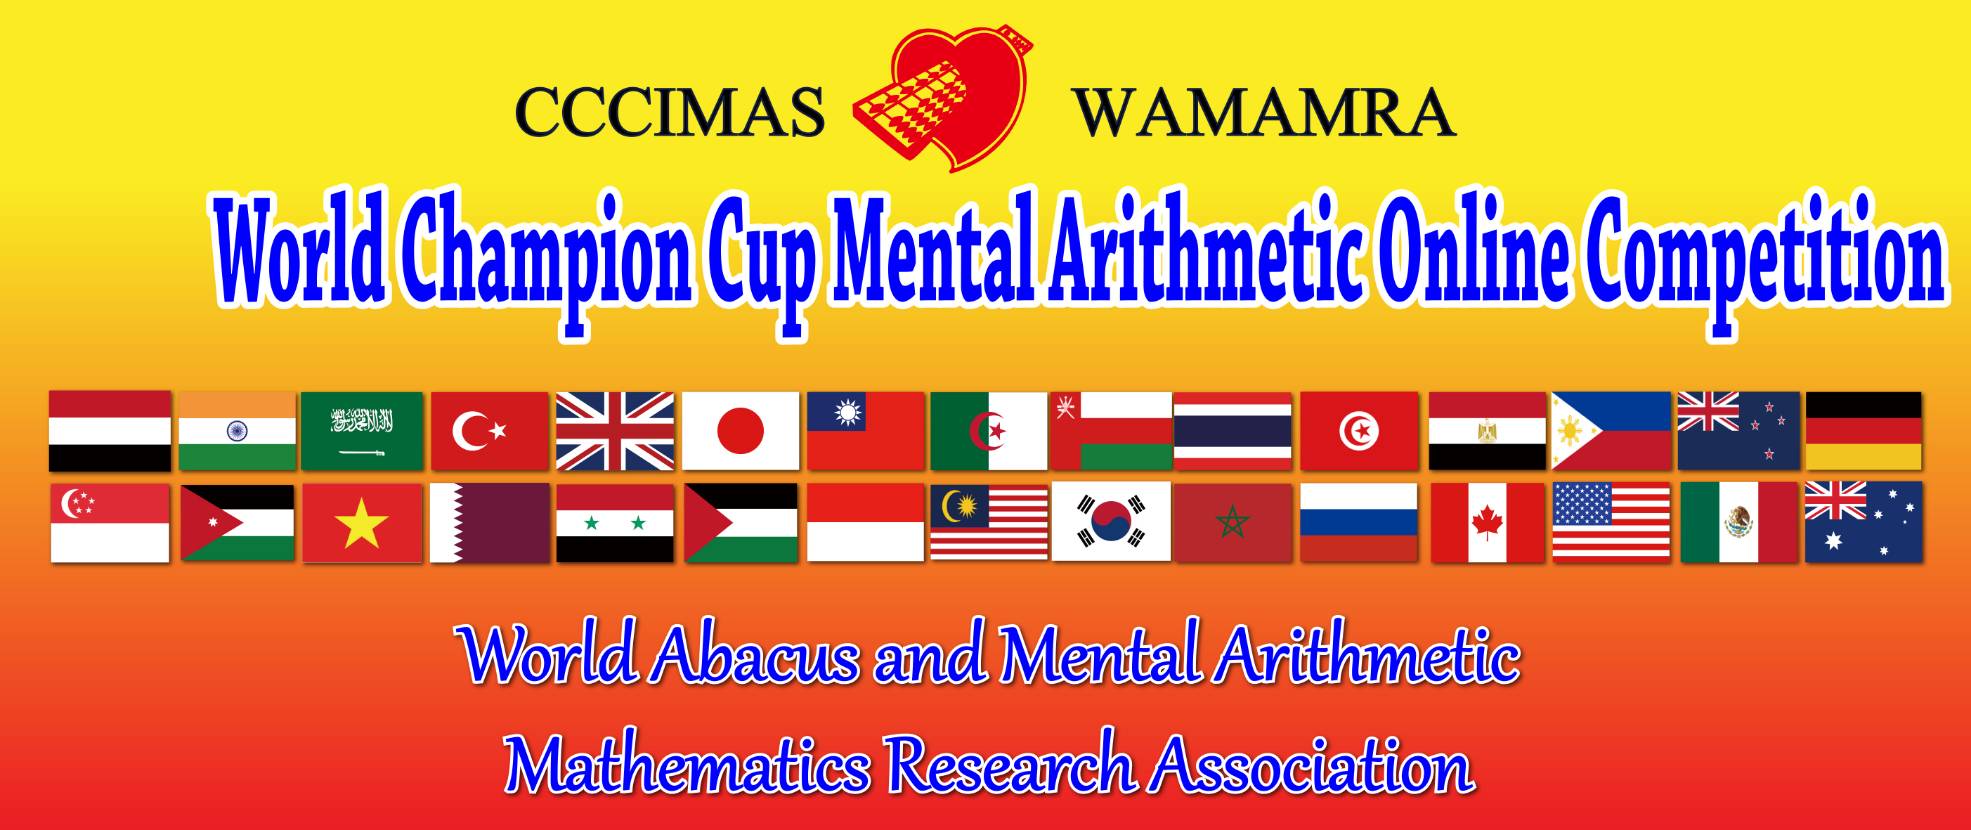 World Champion Cup Mental Arithmetic Online Competition